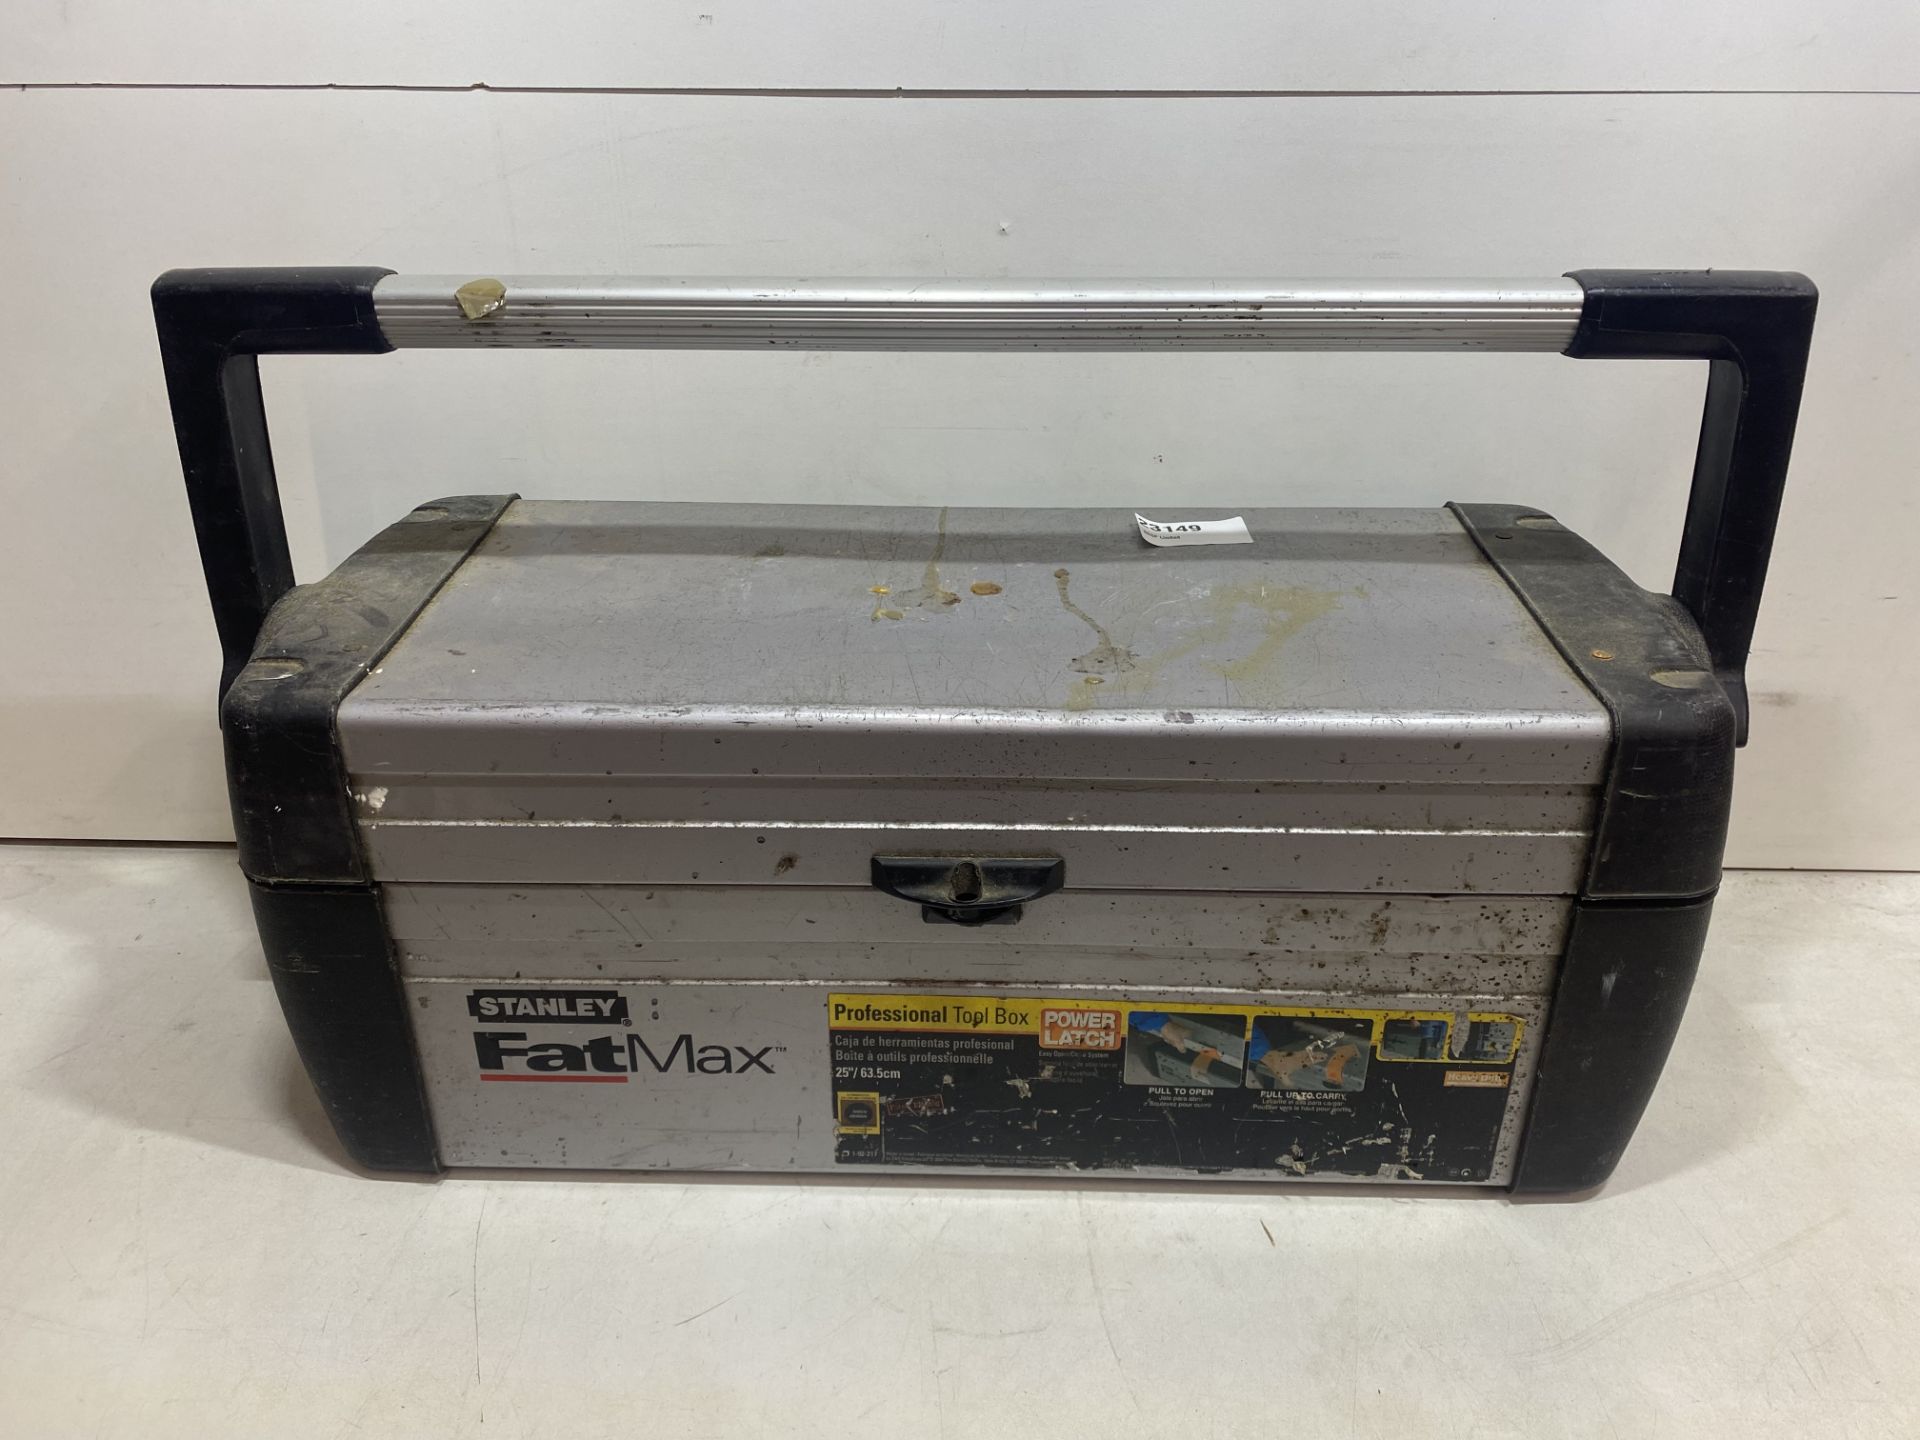 2 x Stanley Fat Max Tool Boxes As Seen In Photos - Bild 2 aus 9